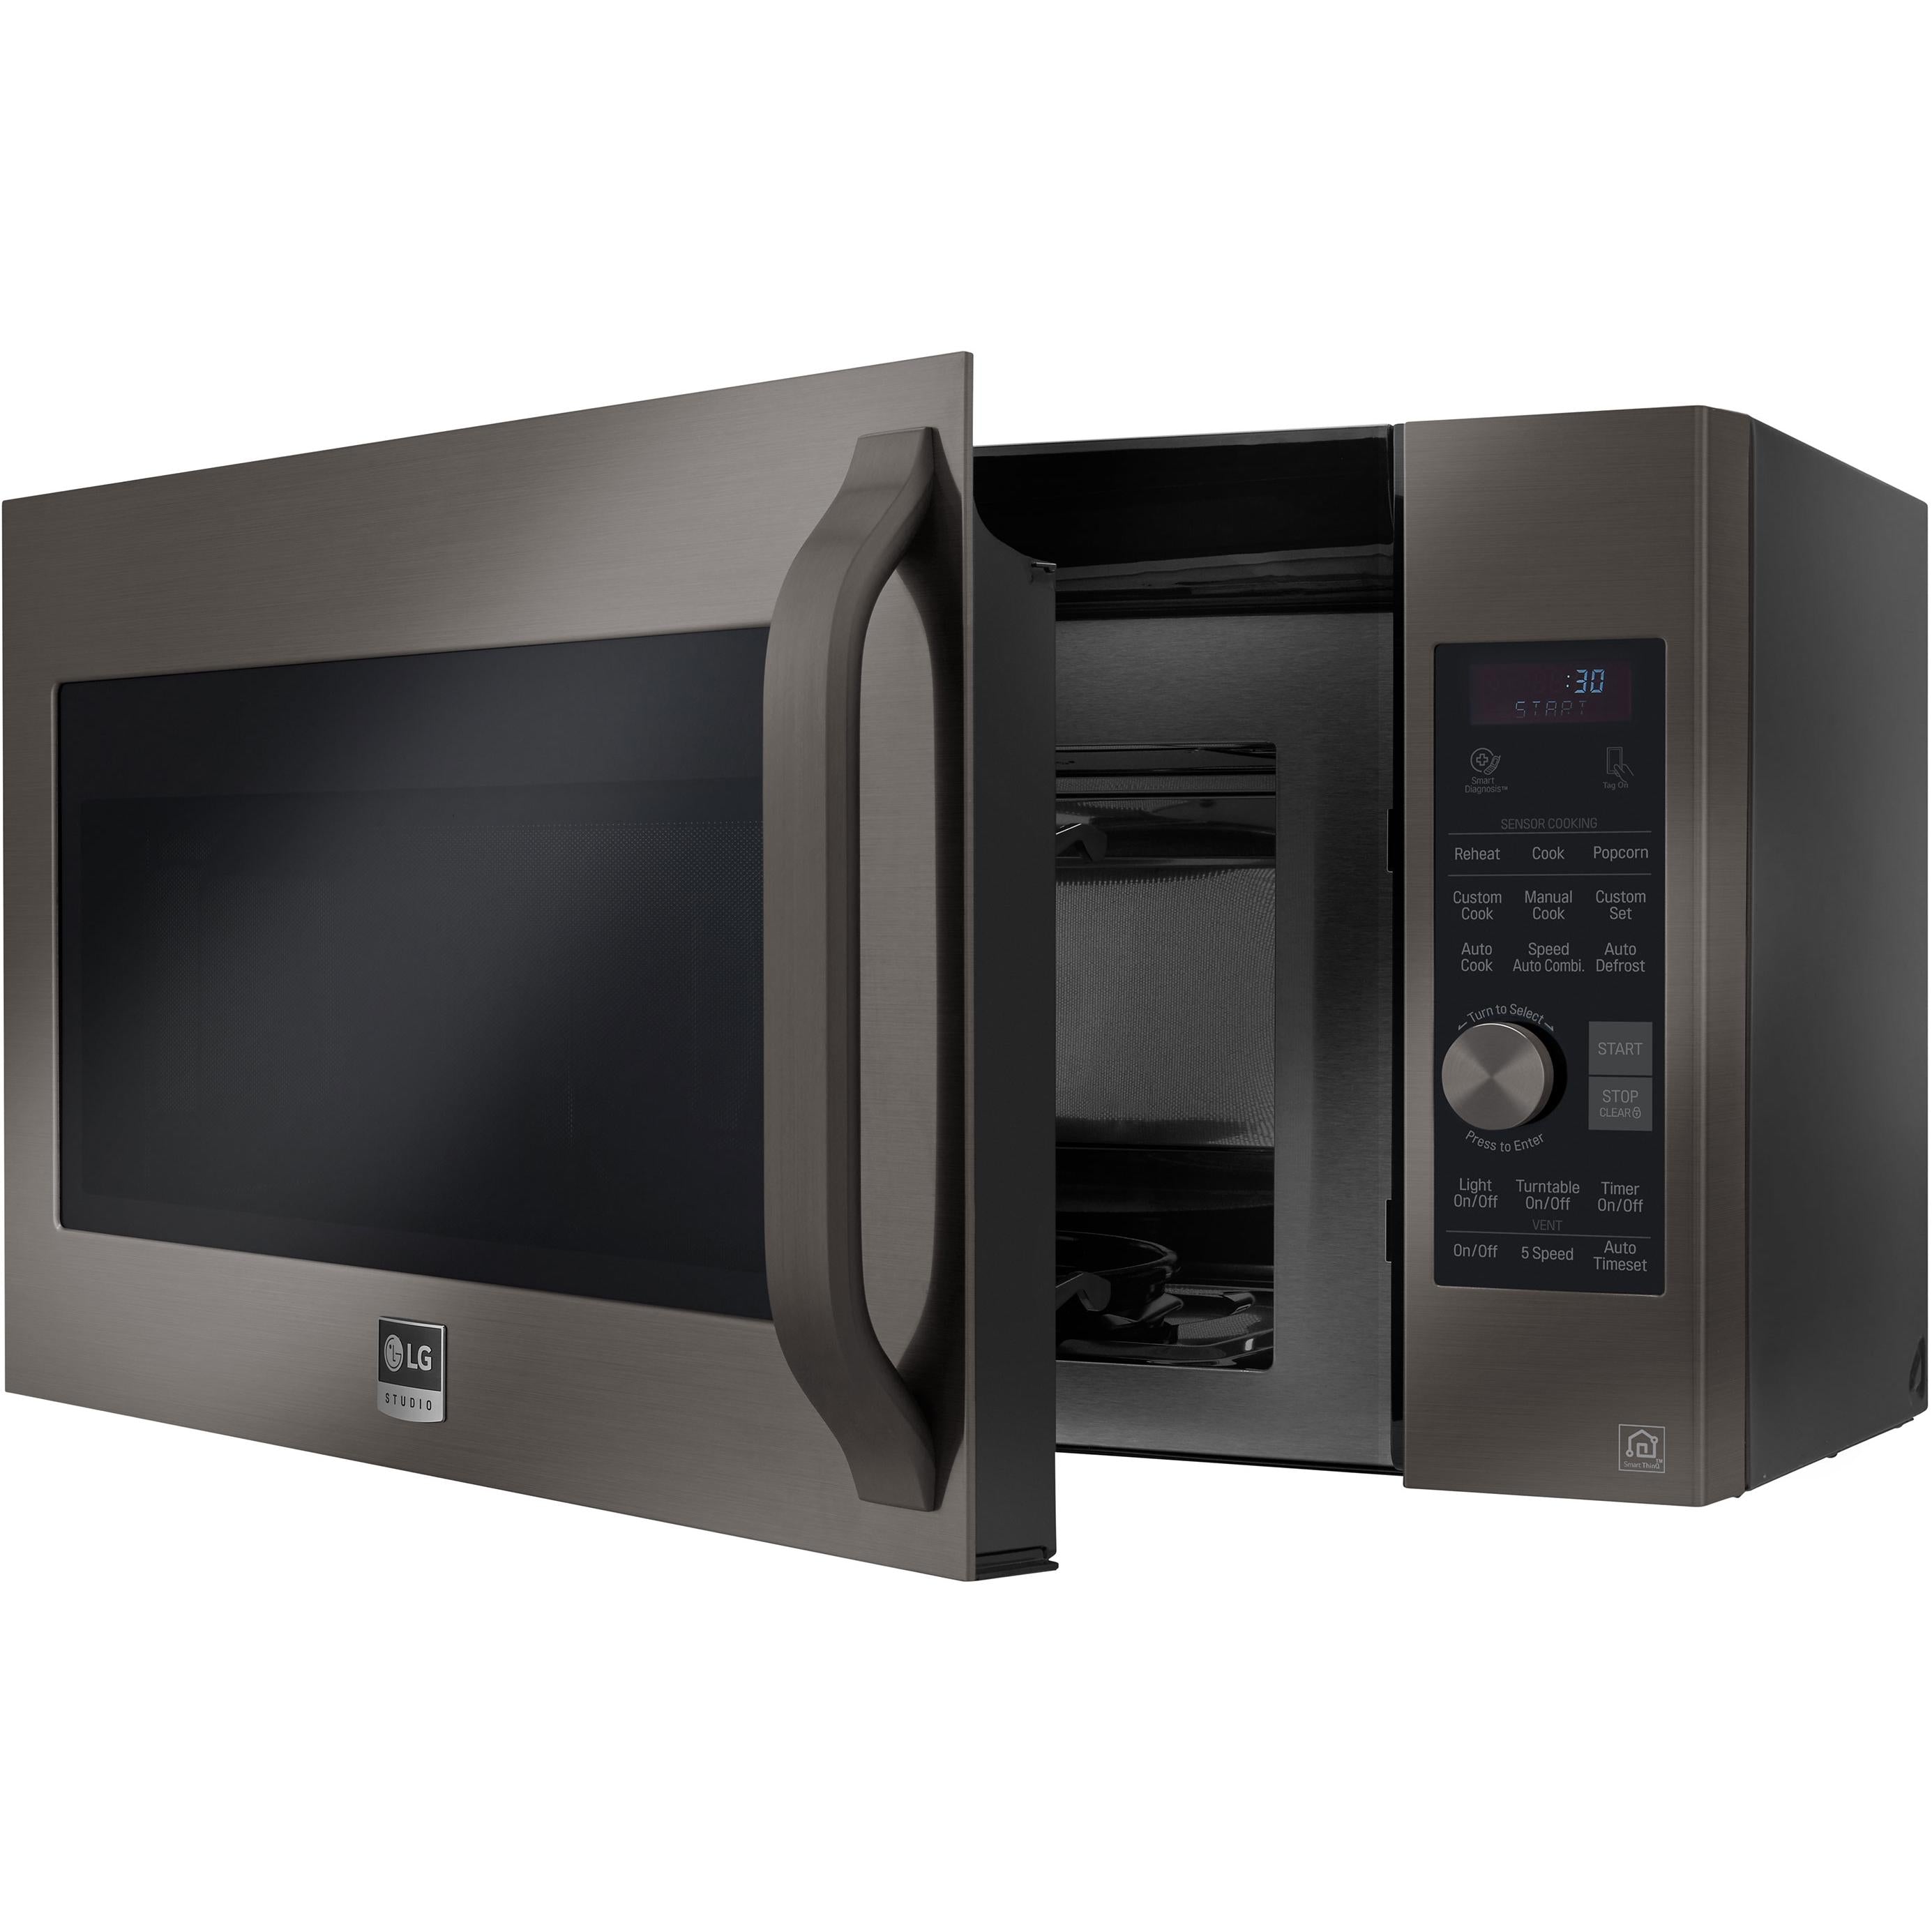 LG STUDIO 30-inch, 1.7 cu. ft. Over-the-Range Microwave Oven with Convection LSMC3089BD